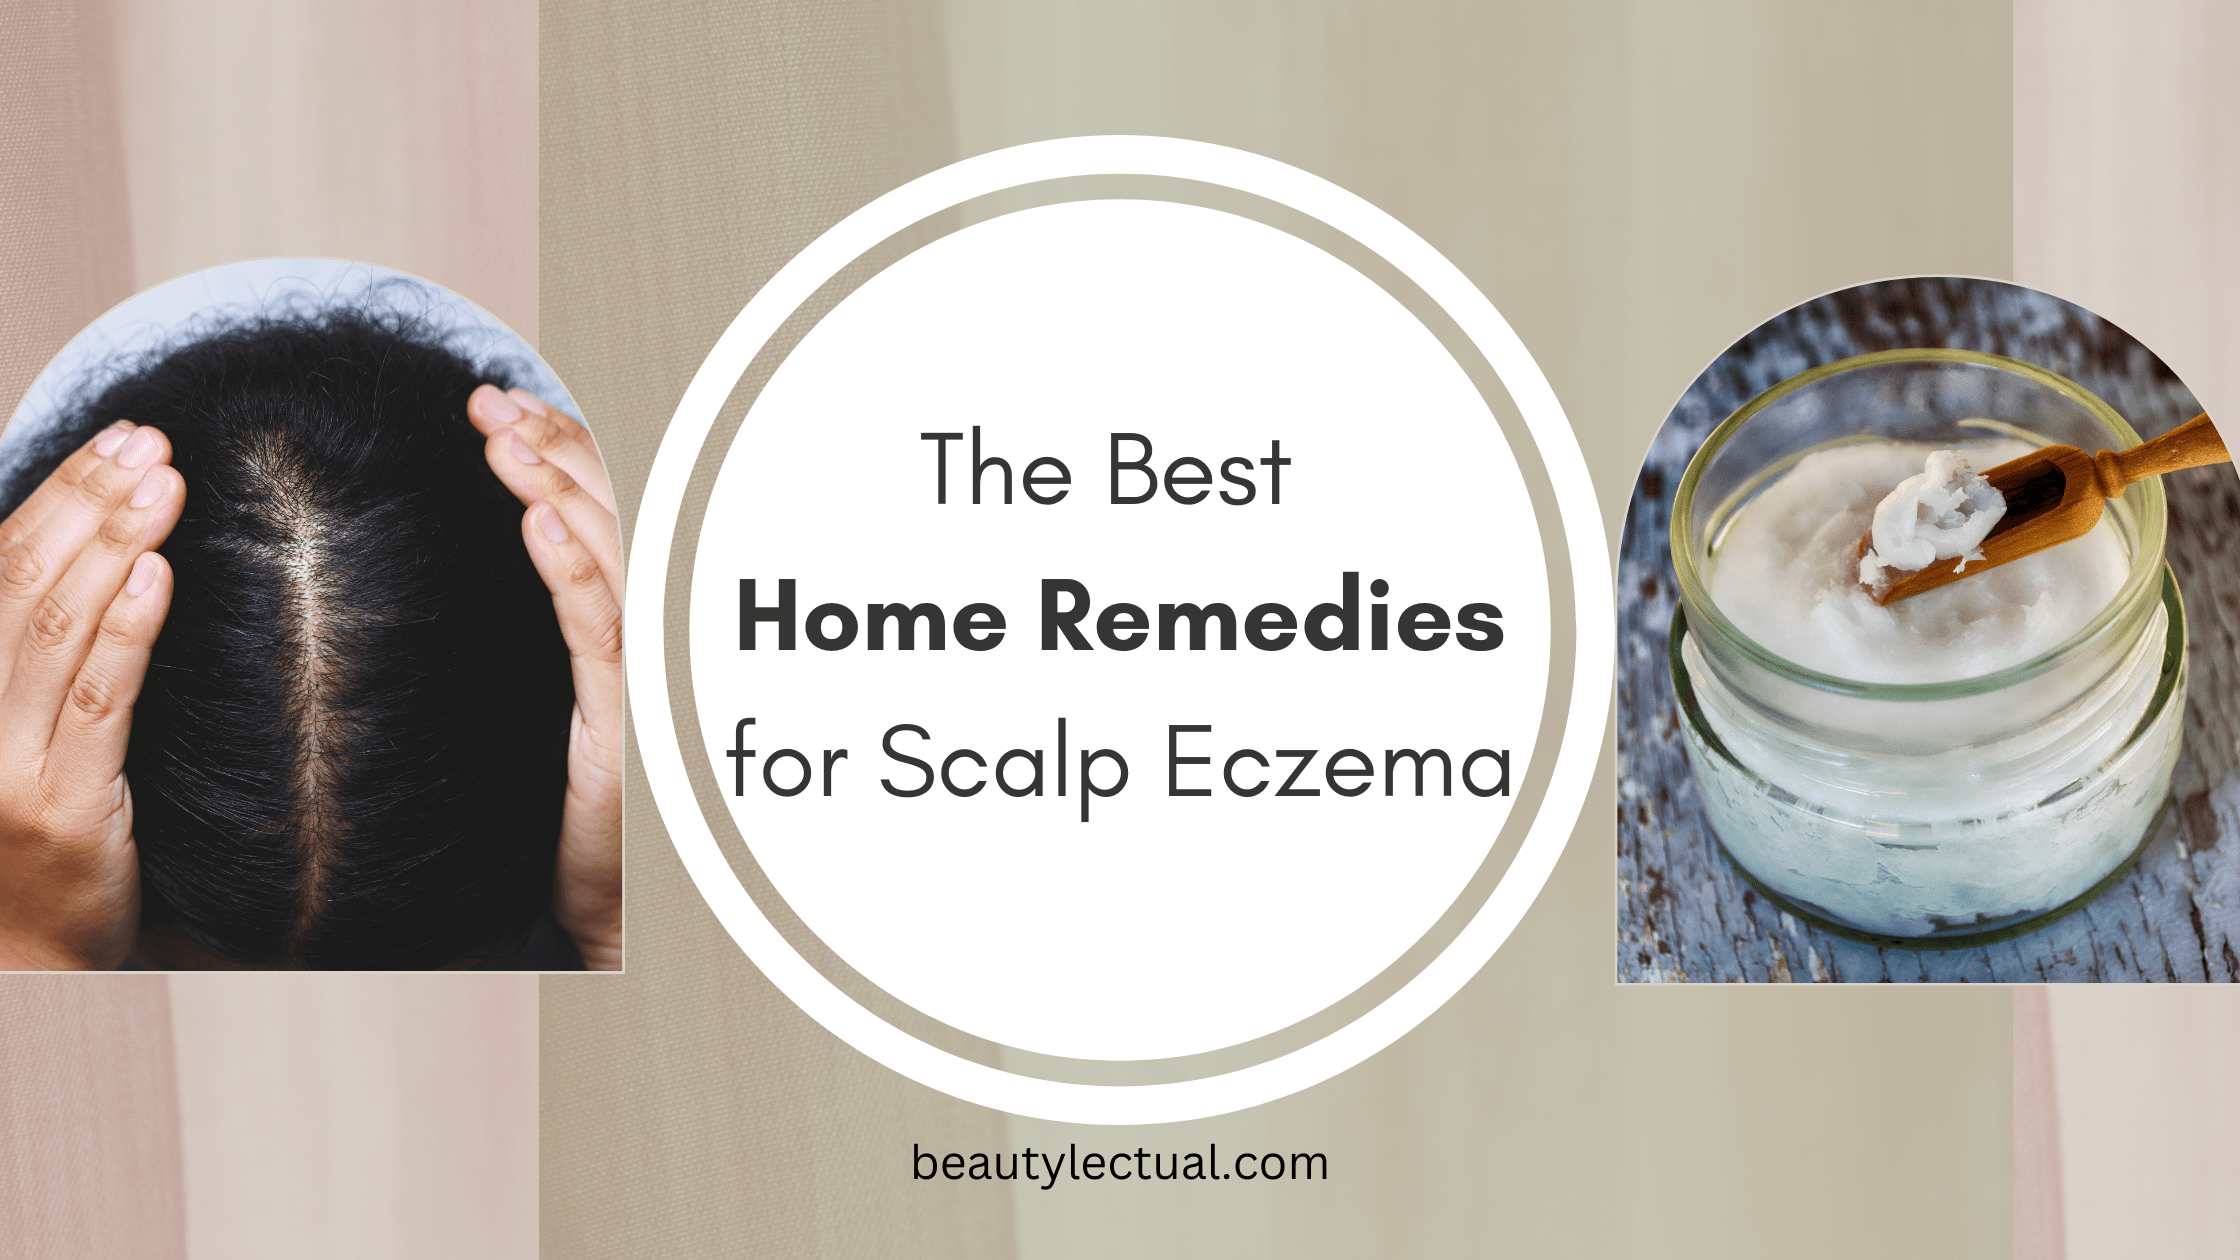 Home Remedies for Scalp Eczema